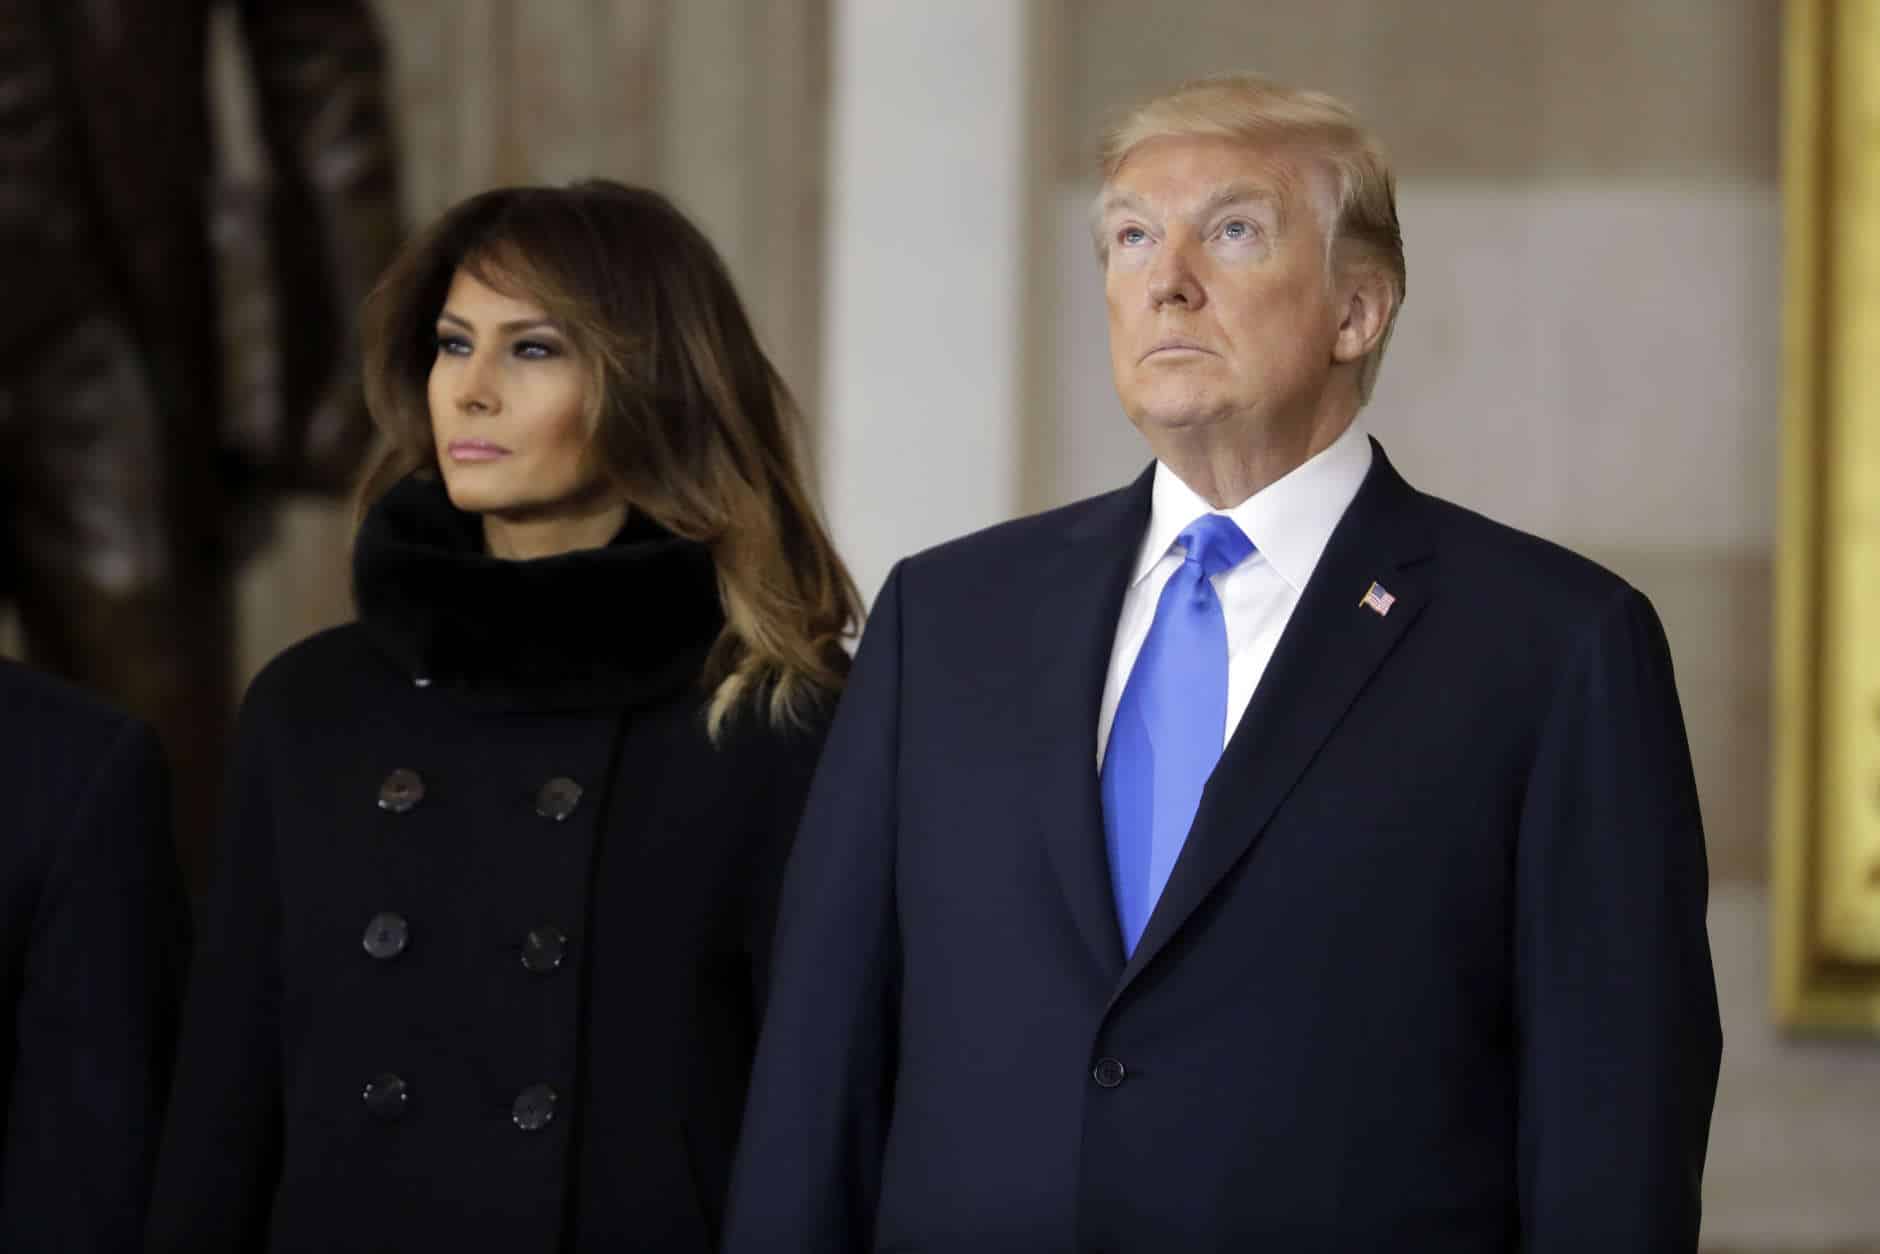 President Donald Trump and first lady Melania Trump, arrive to participate in a ceremony honoring Reverend Billy Graham in the Rotunda of the U.S. Capitol building, Wednesday, Feb. 28, in Washington. (AP Photo/Evan Vucci)